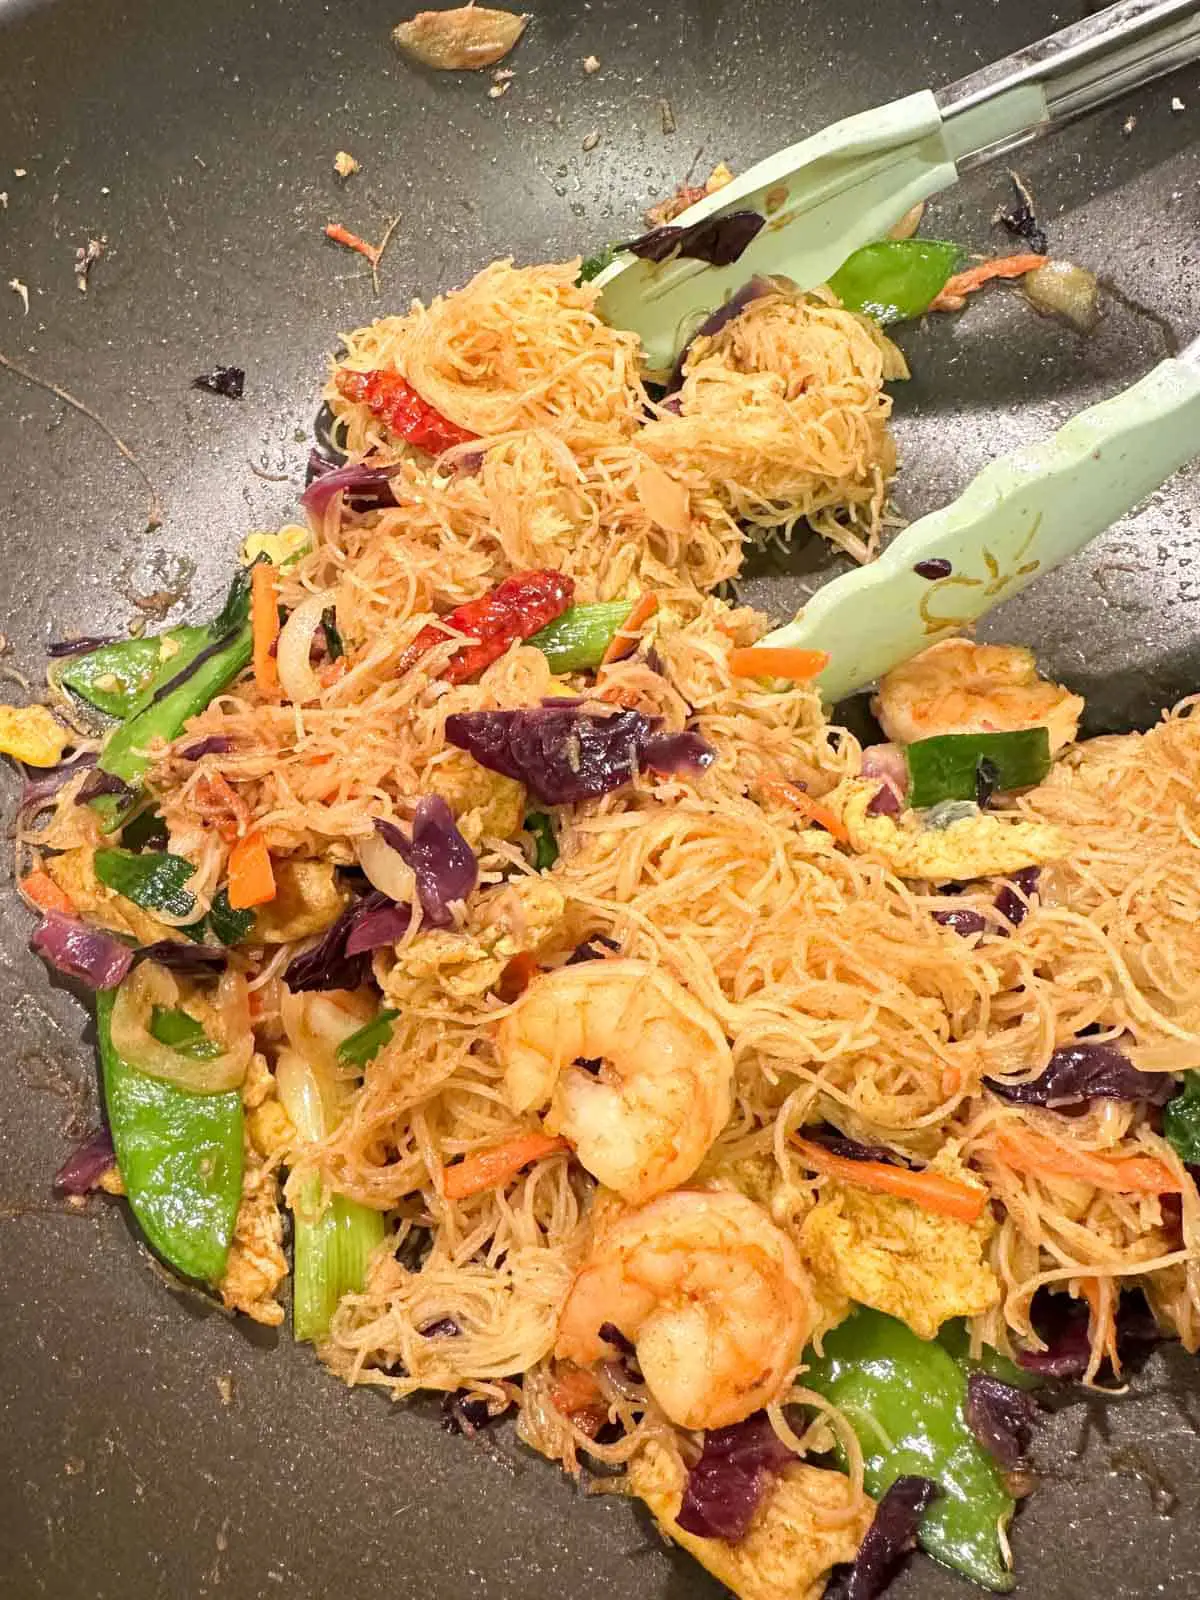 Rice noodles, shrimp, snow peas, cabbage, carrots, egg, and dried chilies in a wok with a pair of blue silicone tongs resting on the side of the wok.